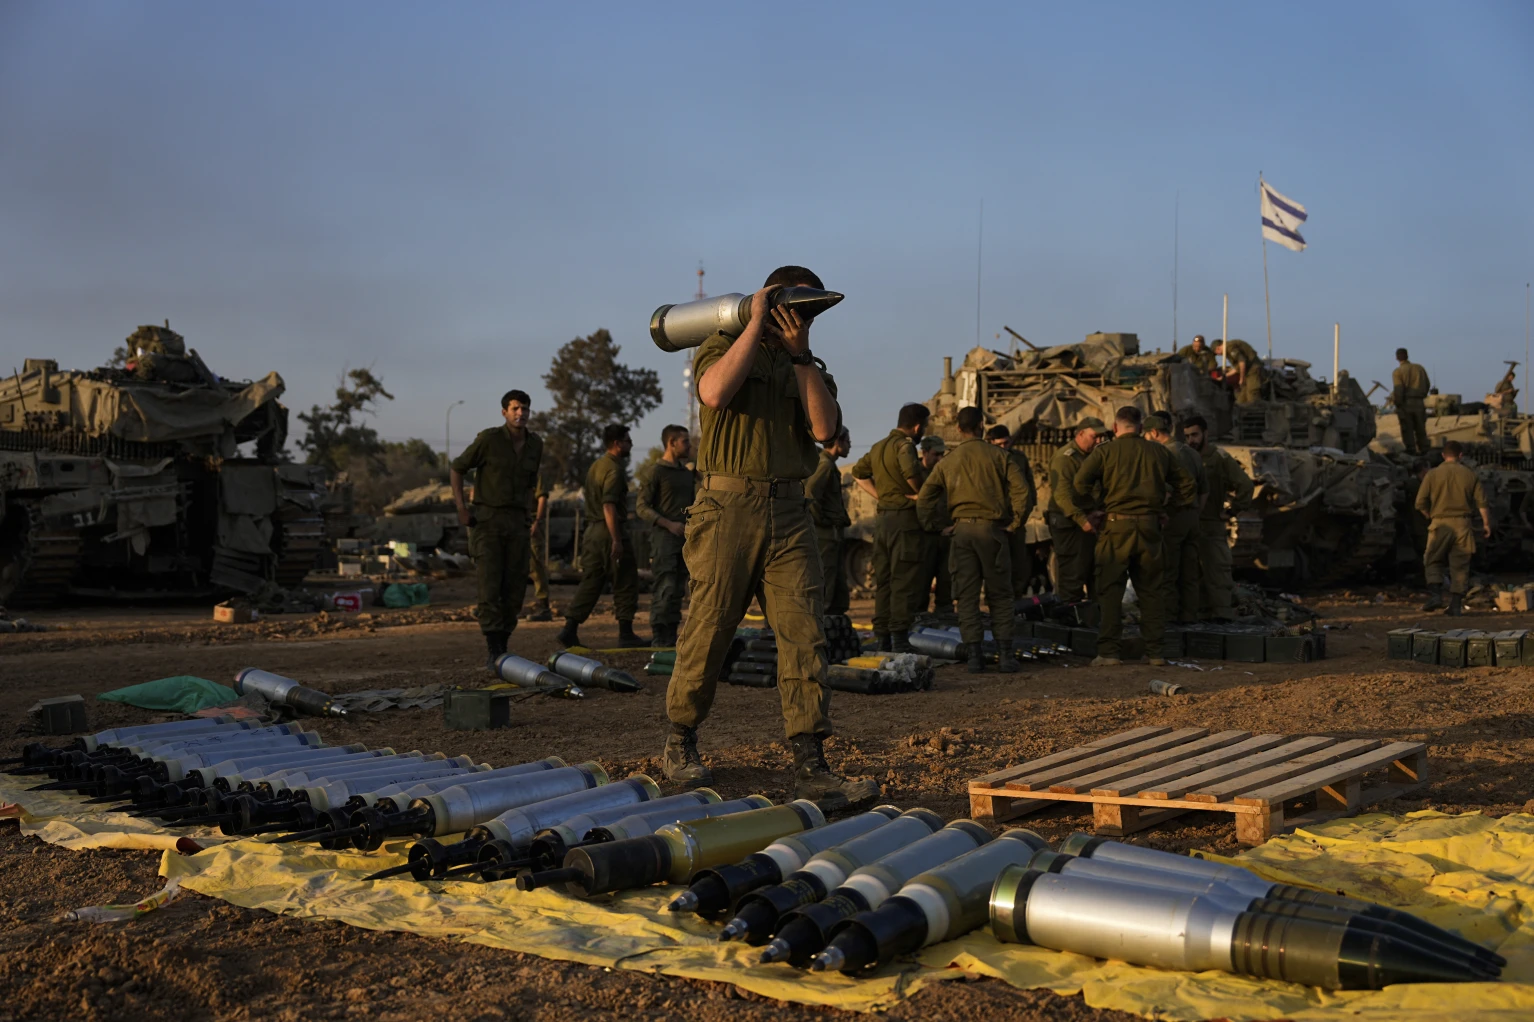 US pressure forces change of war strategy as Israel pulls out some troops from Gaza Strip